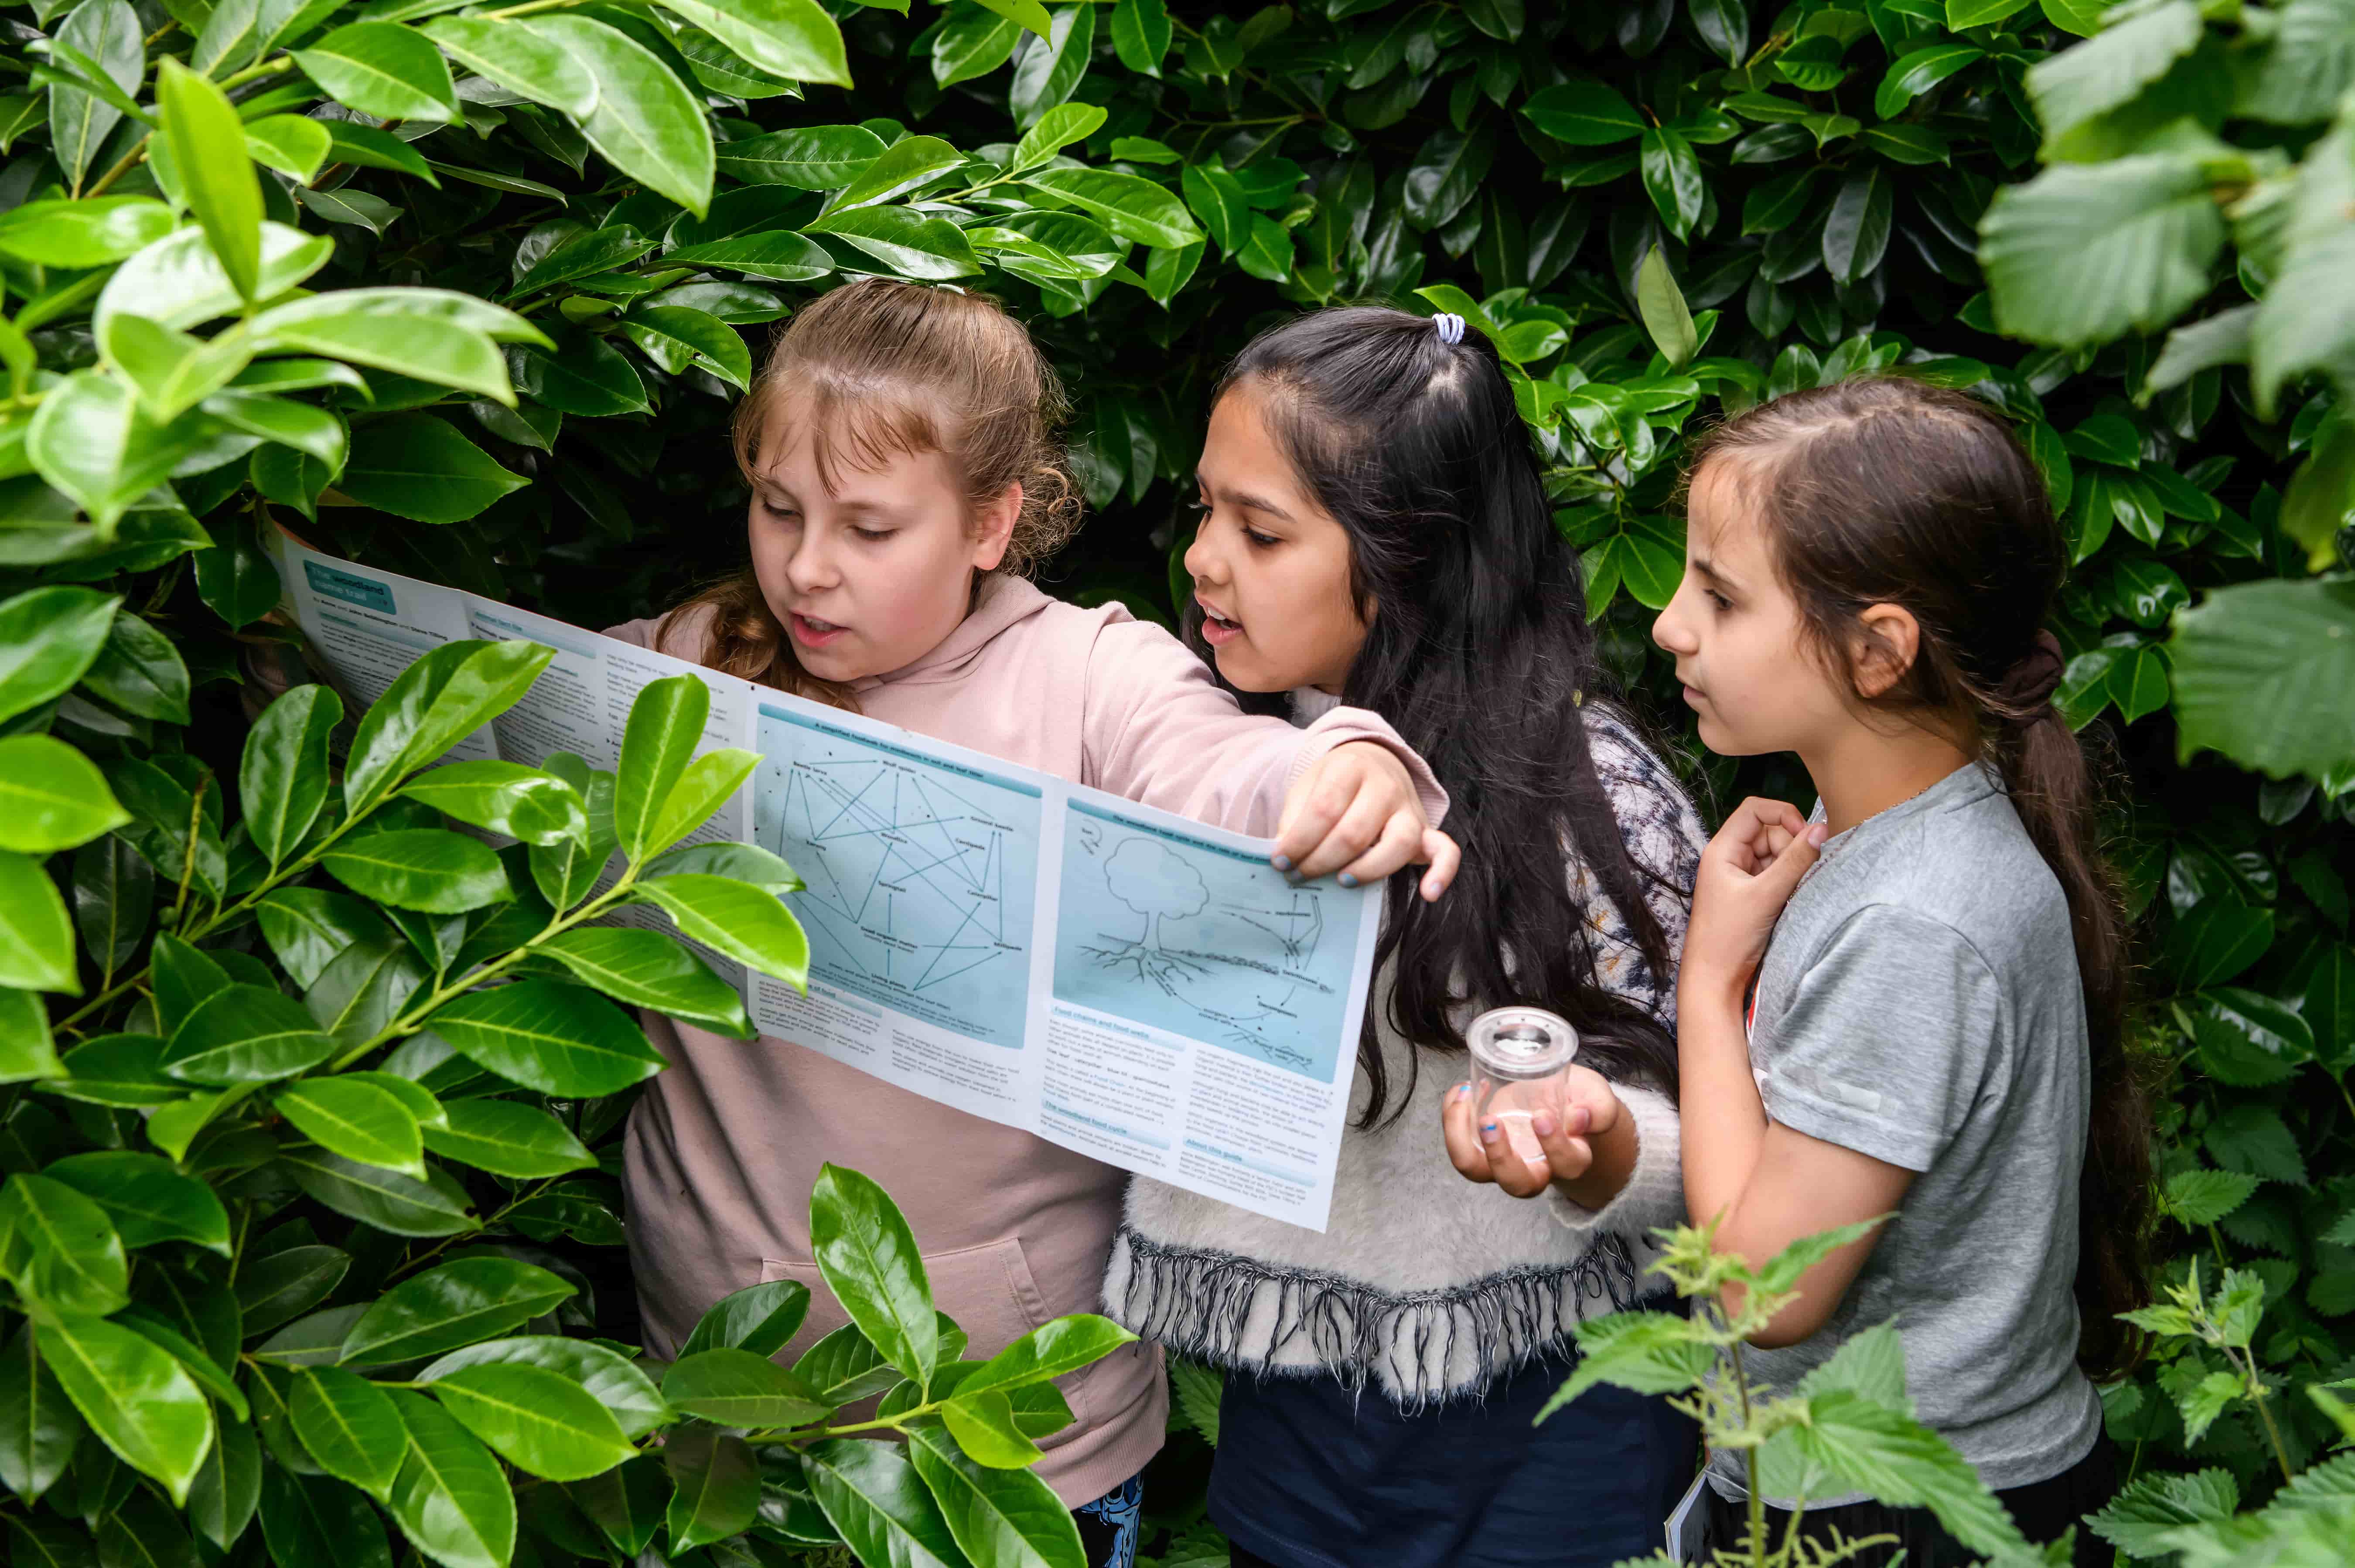 A group of three primary school age children review a large map standing in a green bush 